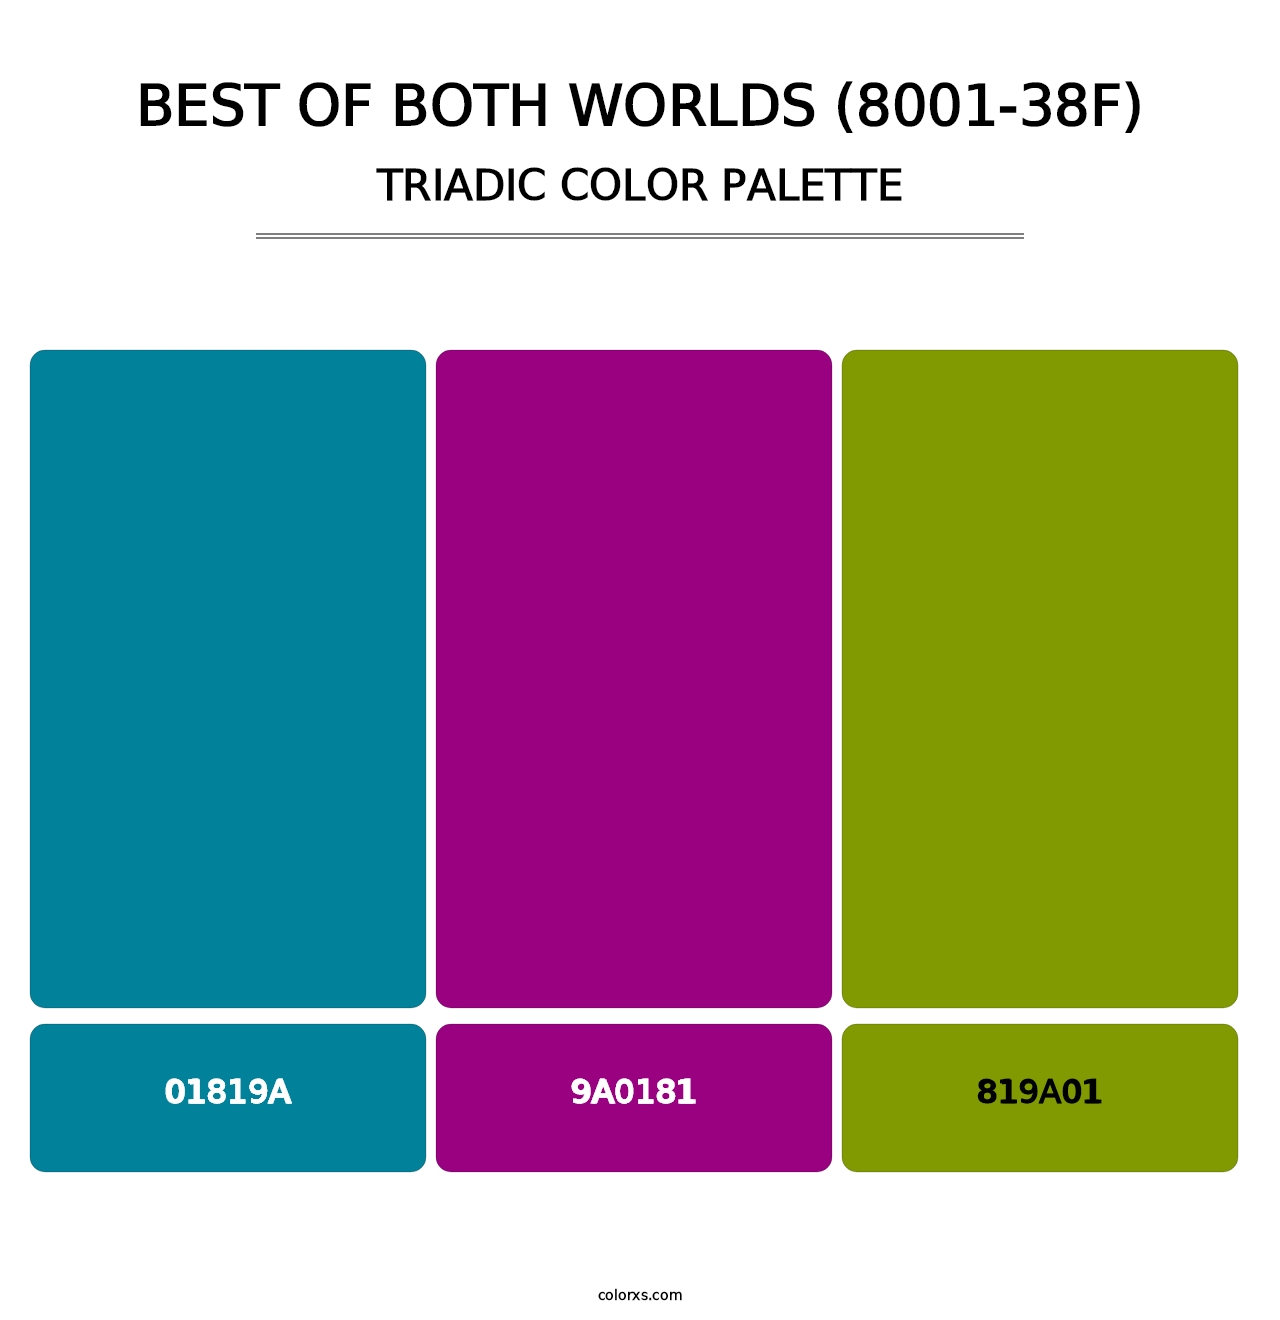 Best of Both Worlds (8001-38F) - Triadic Color Palette